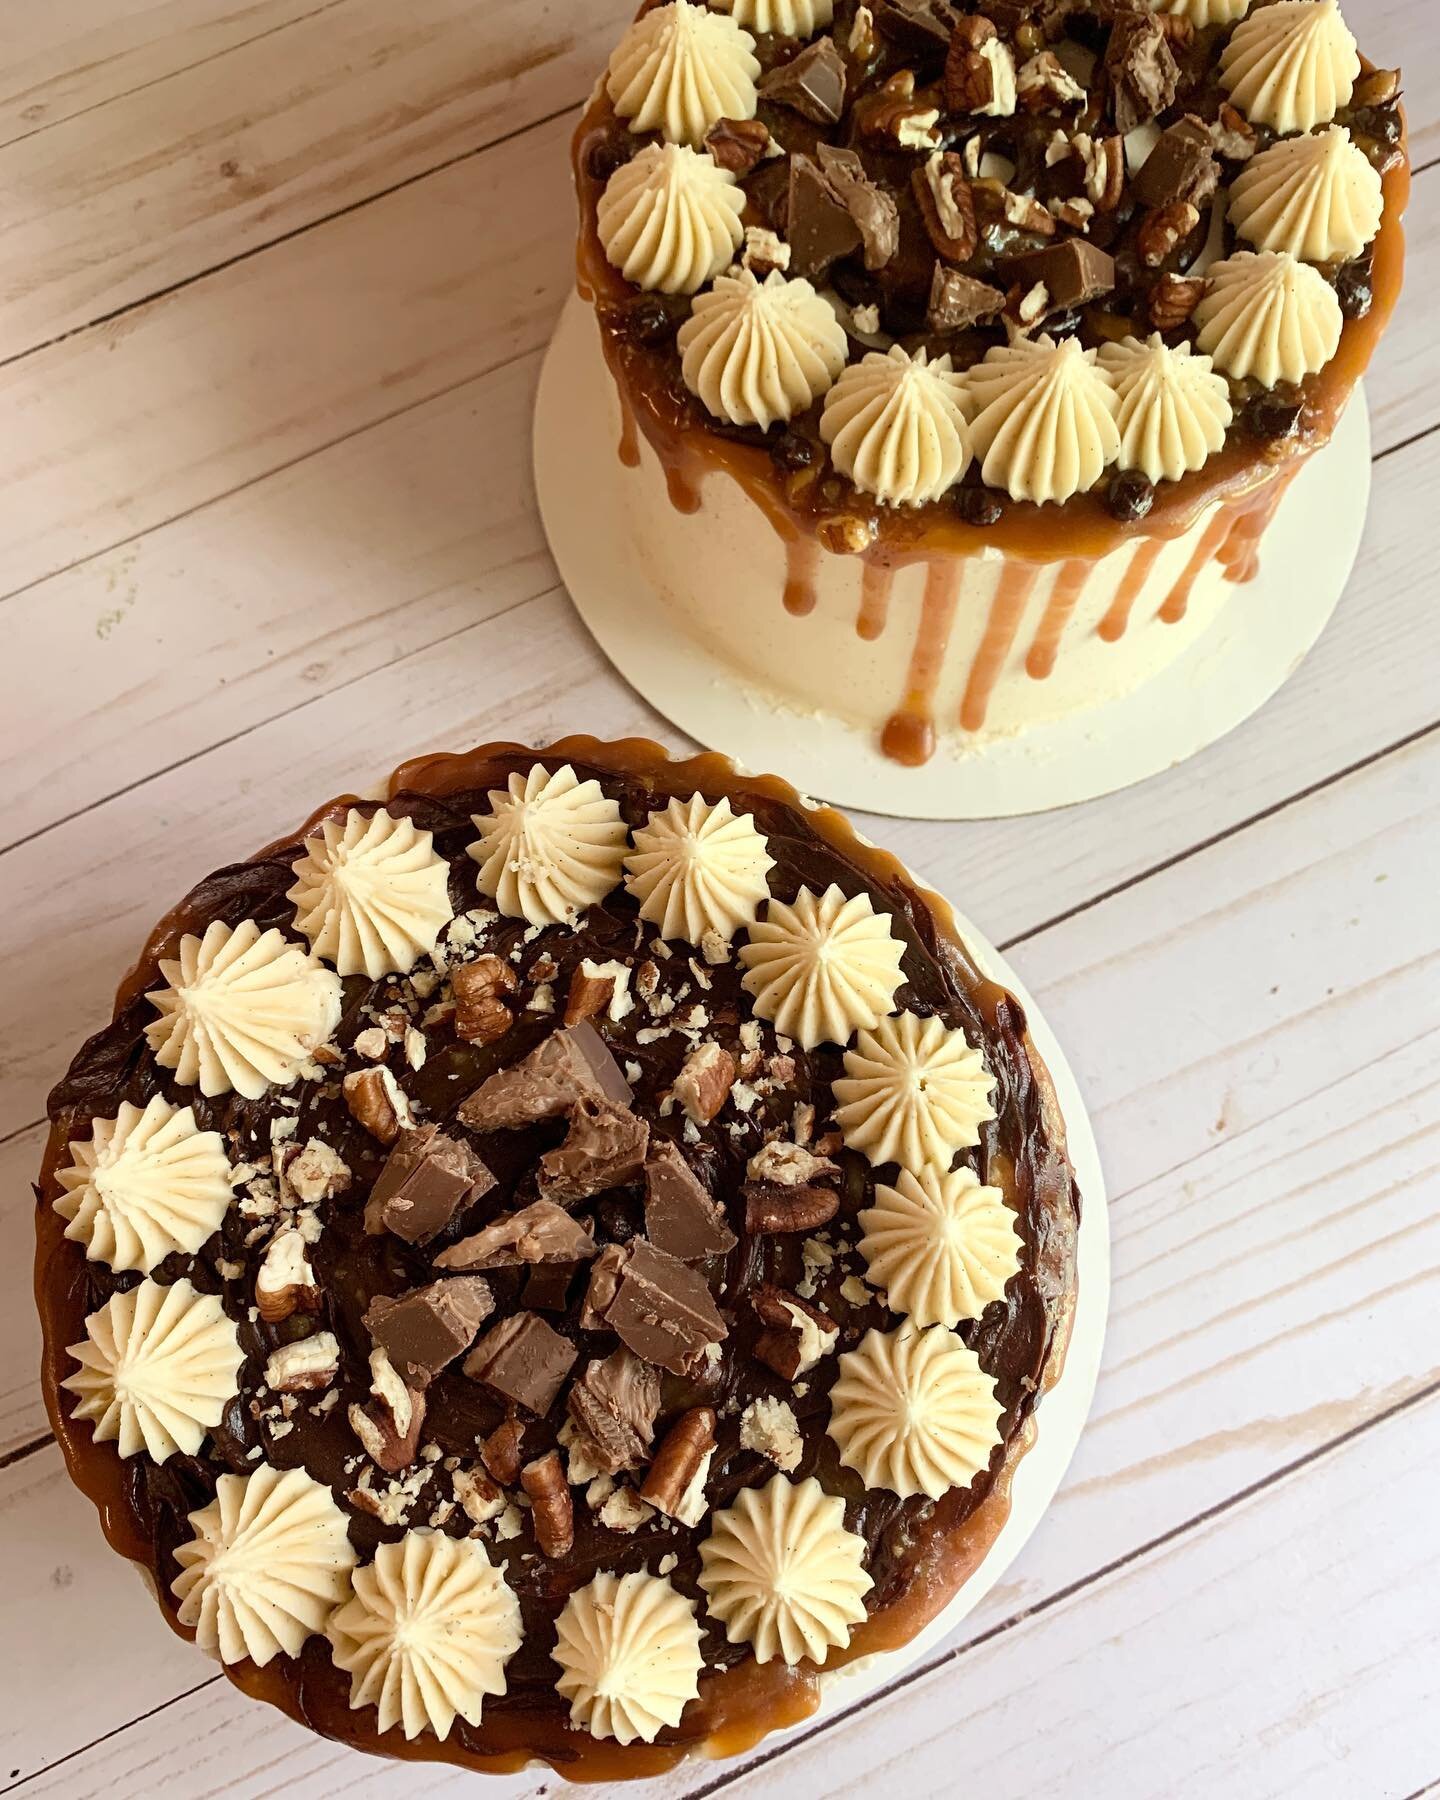 [SOLD OUT] I have 2 small Chocolate Turtle Cakes available for pickup today or tomorrow! 2 layer Chocolate Cake with Salted Caramel Buttercream with a gooey pecan caramel. Around 6 servings. $25 each. 

Delivery within Fayetteville City Limits is ava